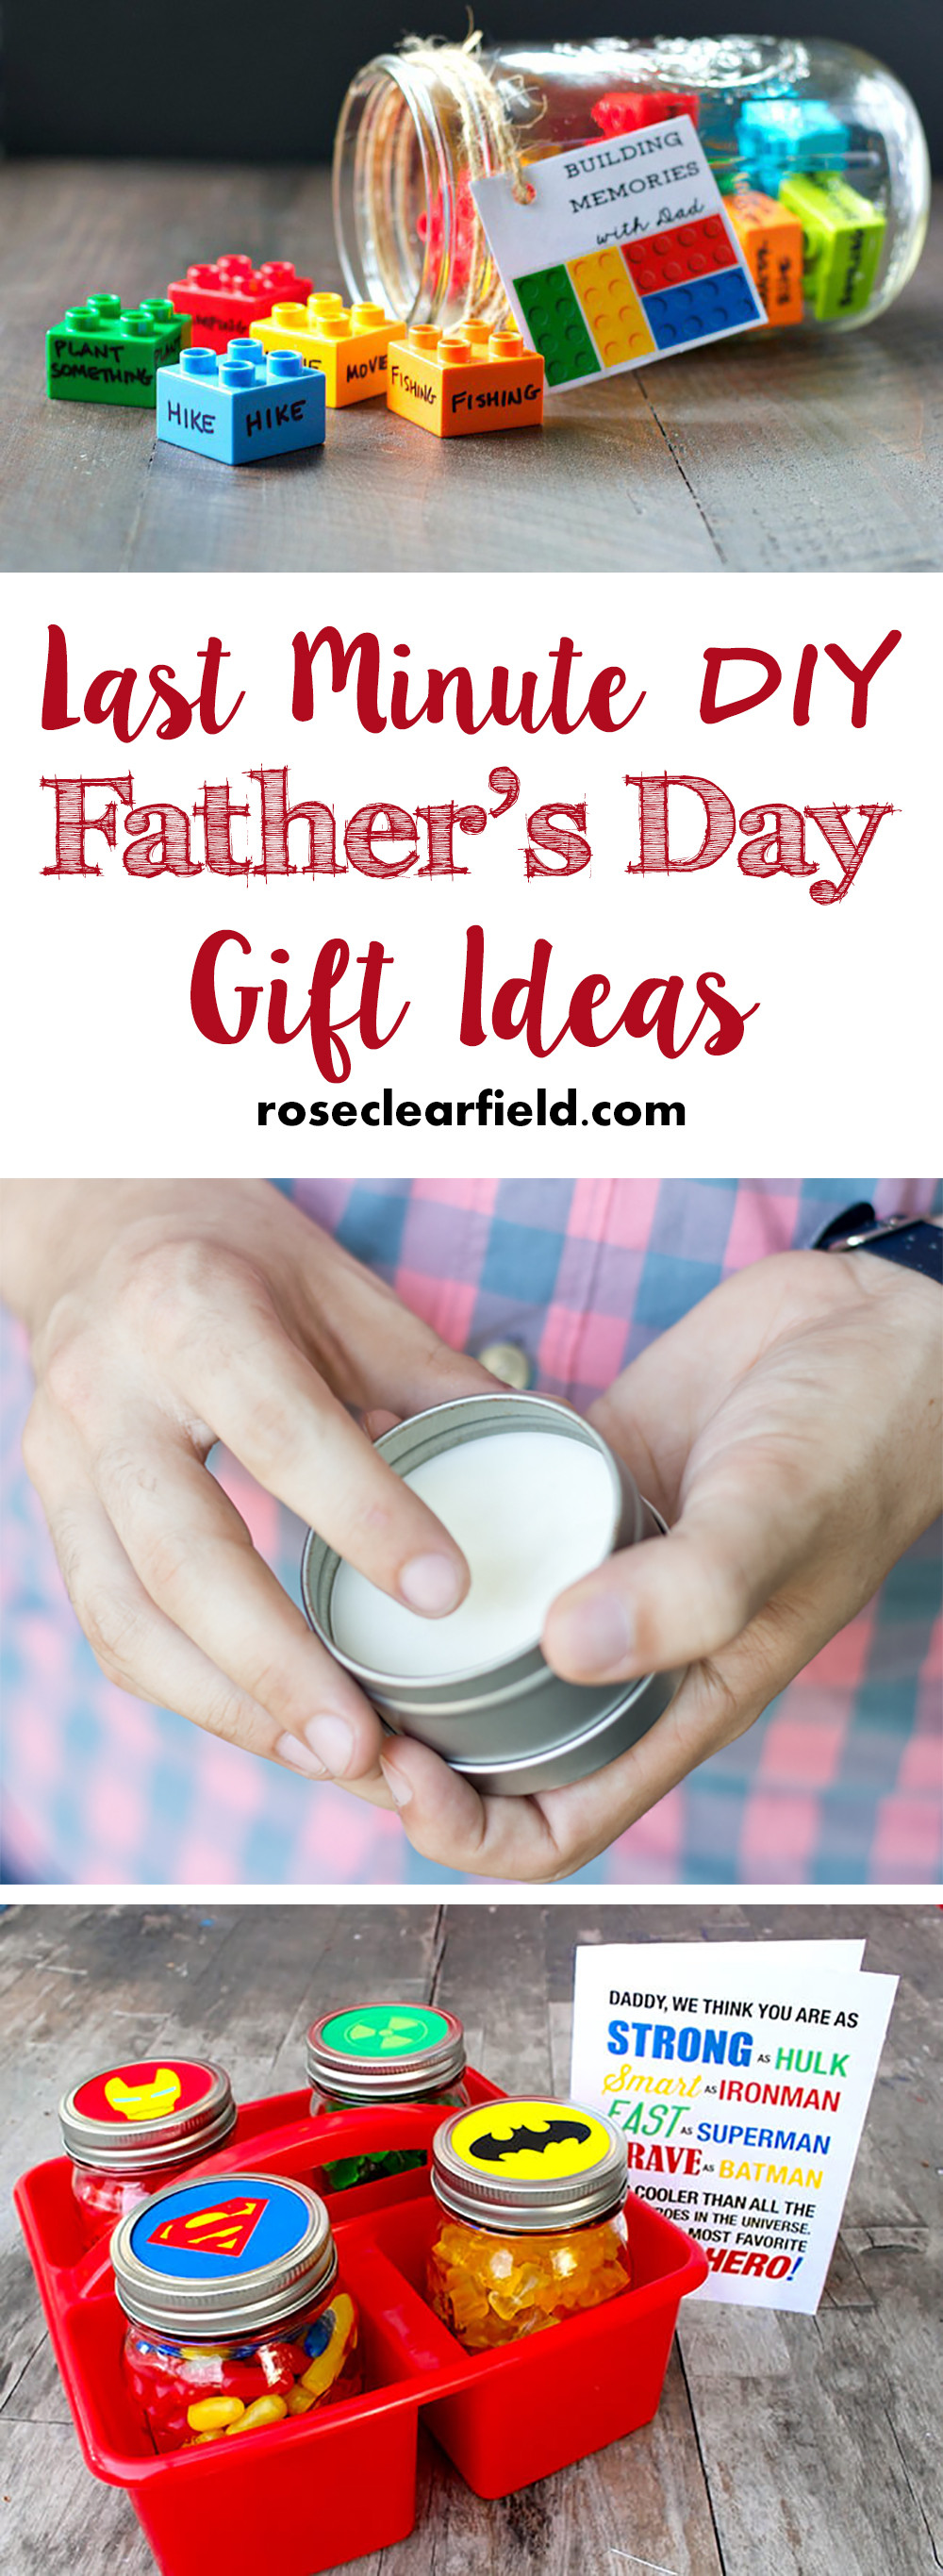 Handmade Father'S Day Gift Ideas
 Last Minute DIY Father s Day Gift Ideas • Rose Clearfield